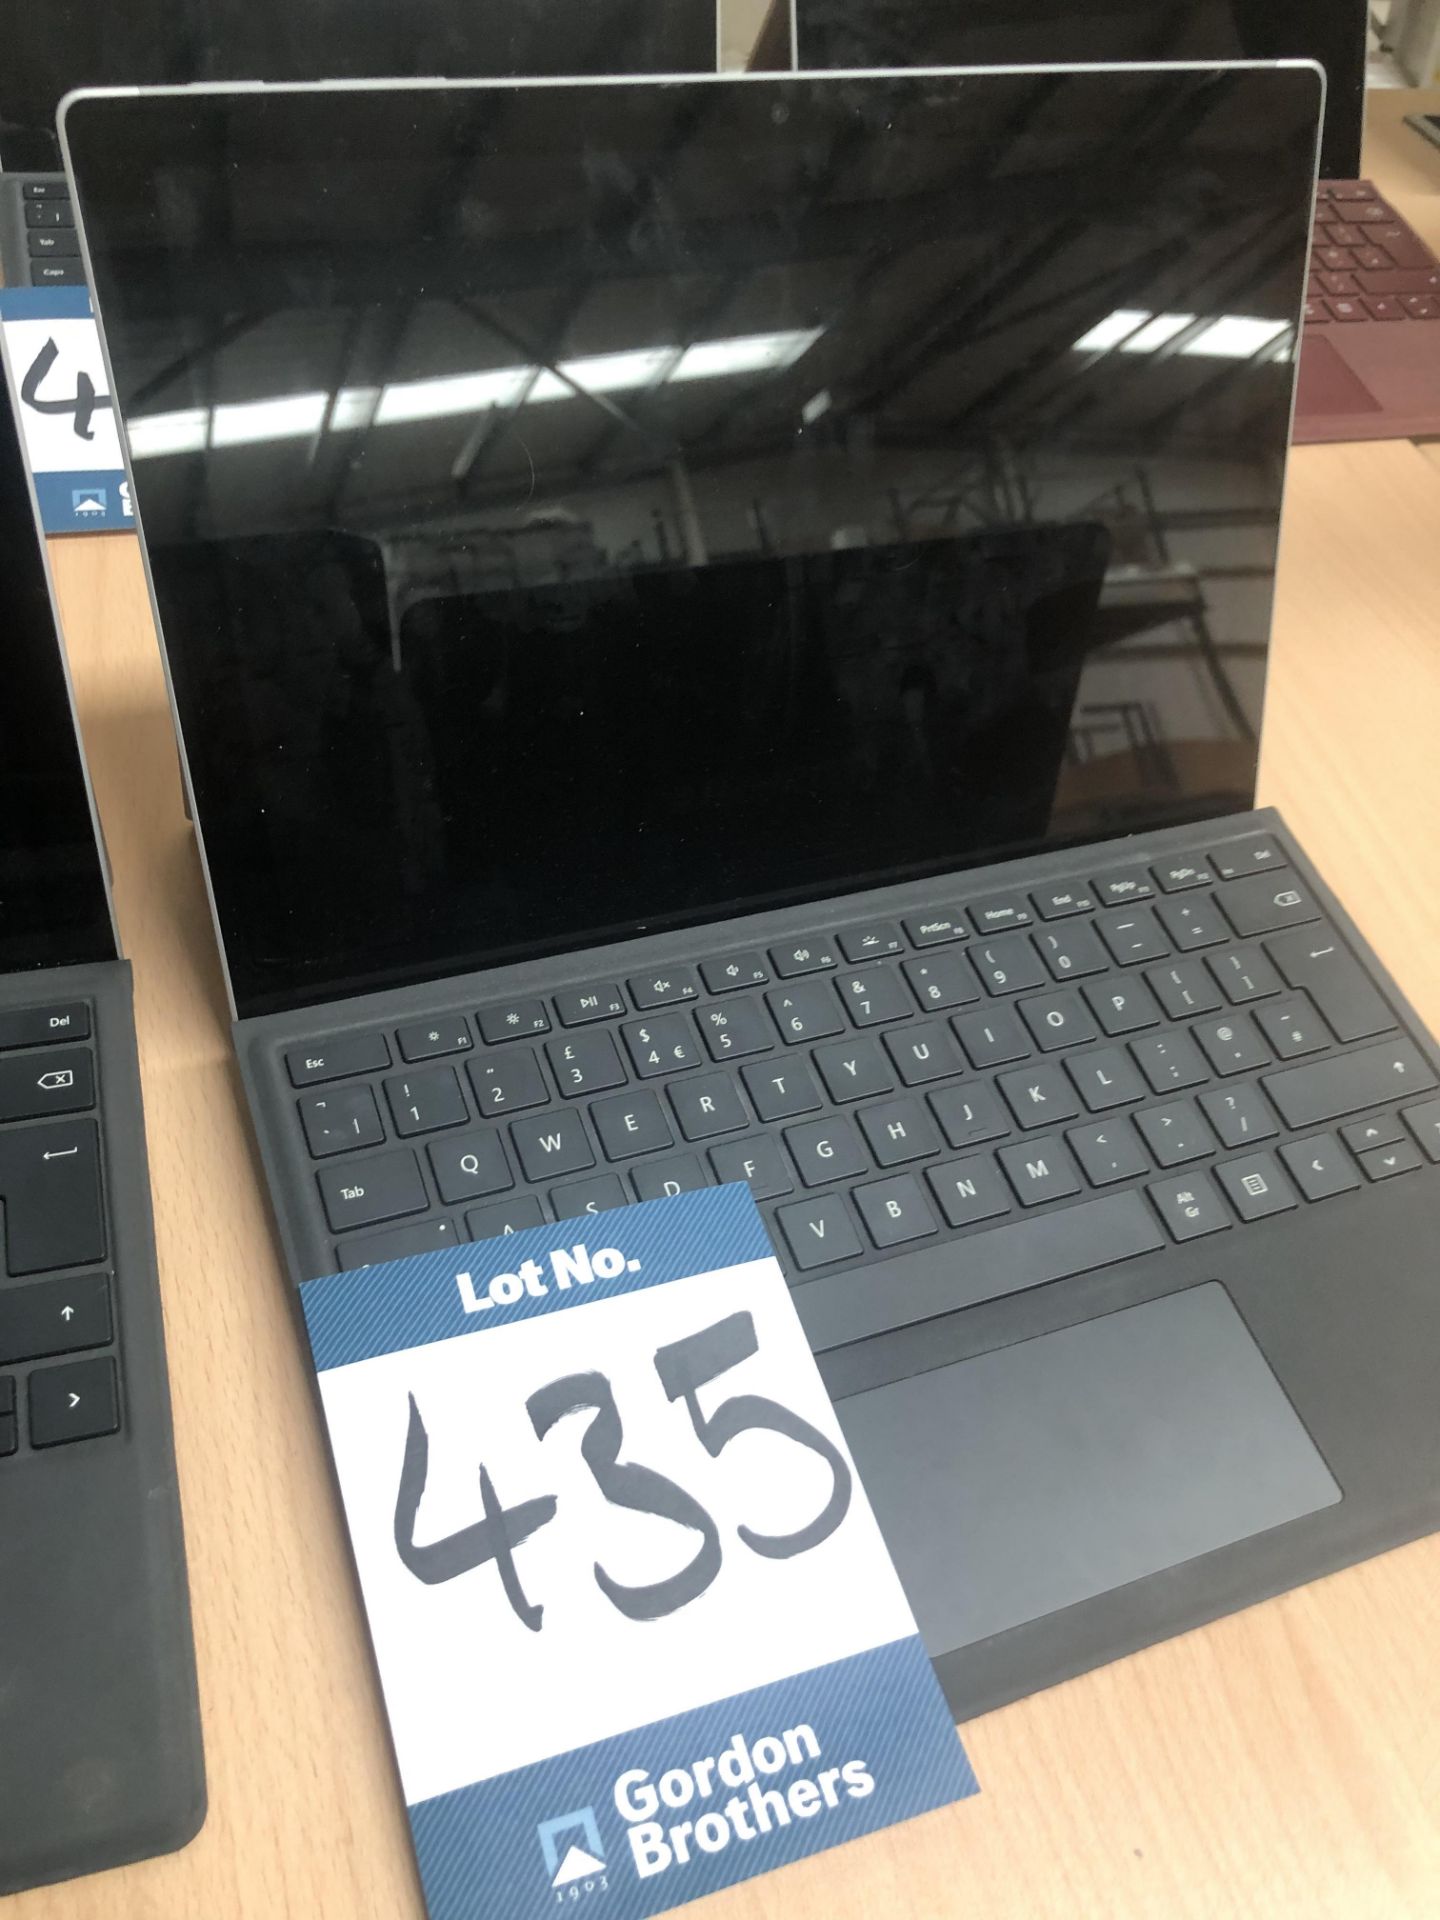 Windows Surface Pro tablet and keyboard (1796/128GB)